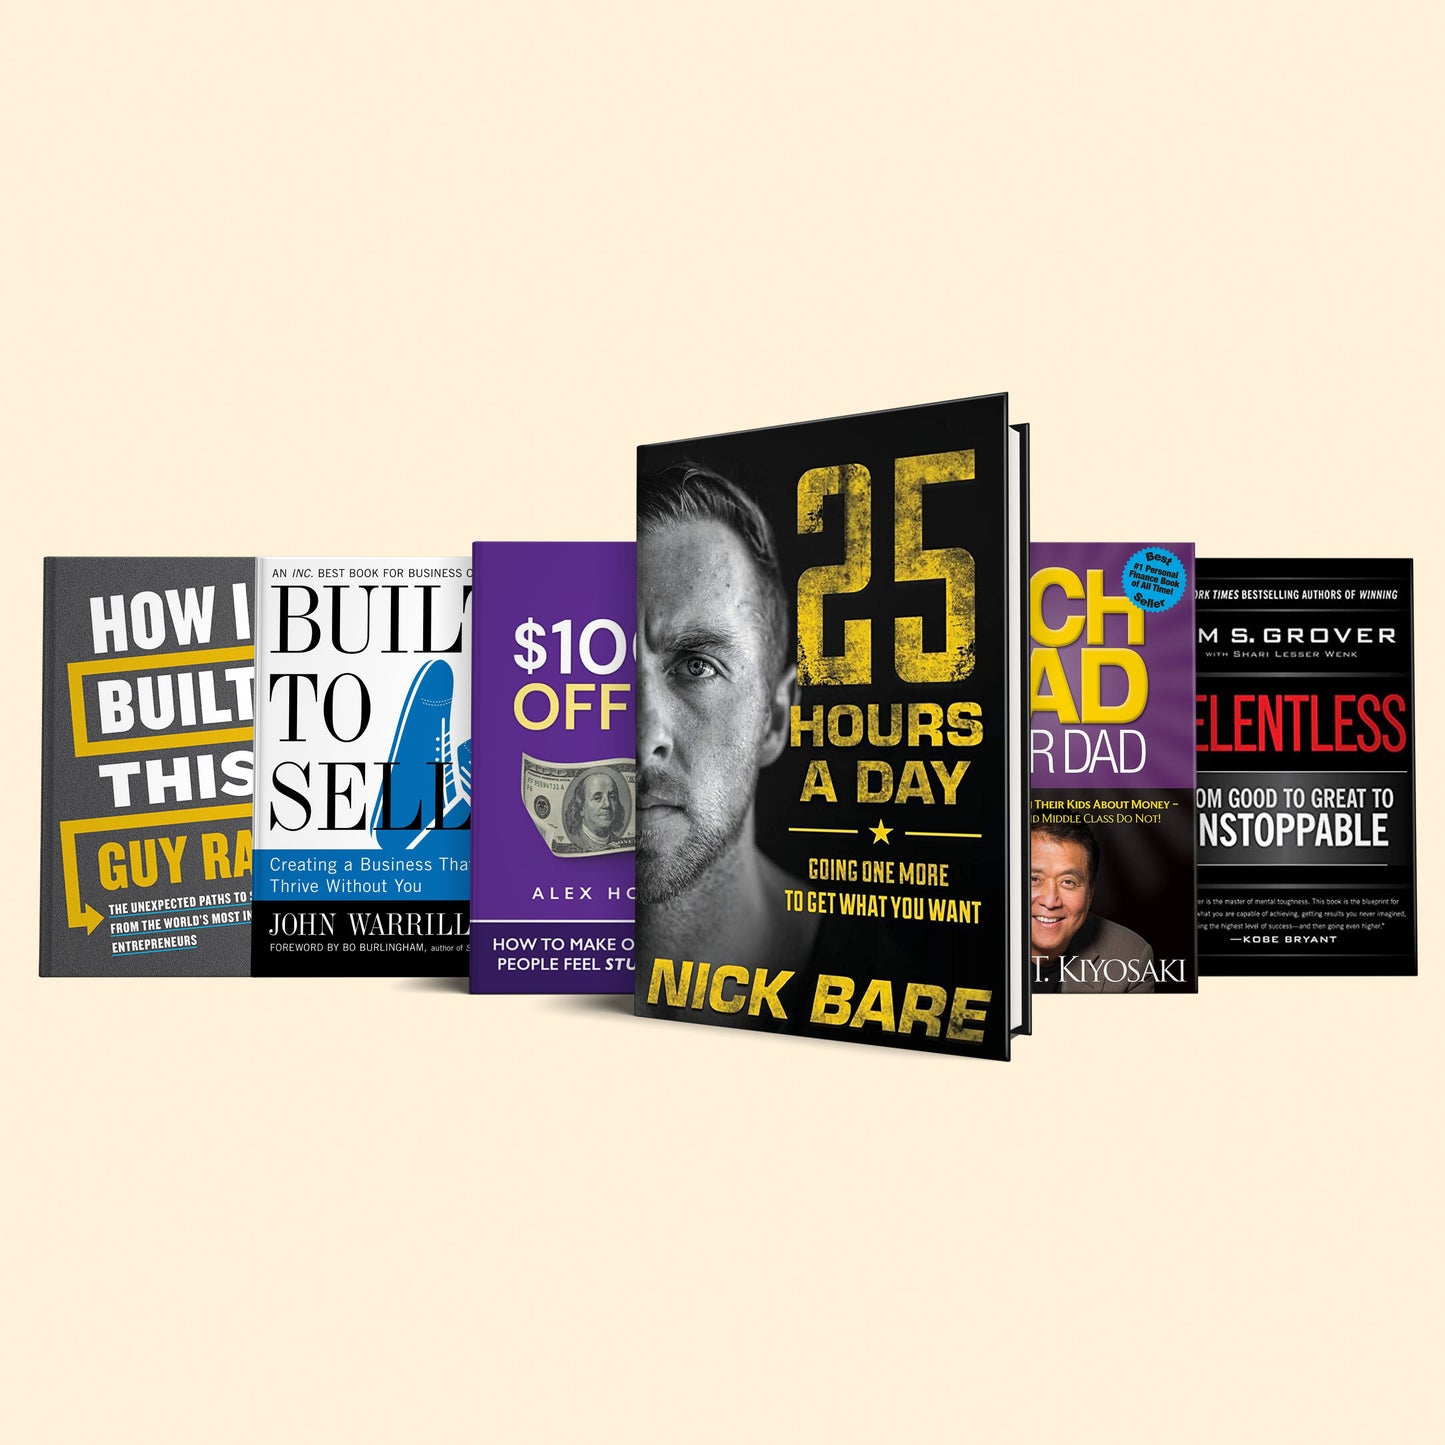 6 book guide to entrepreunarial success : 100M$ offer, Built to sell, 25 hours a day, Relentless, How i built this, Rich dad poor dad